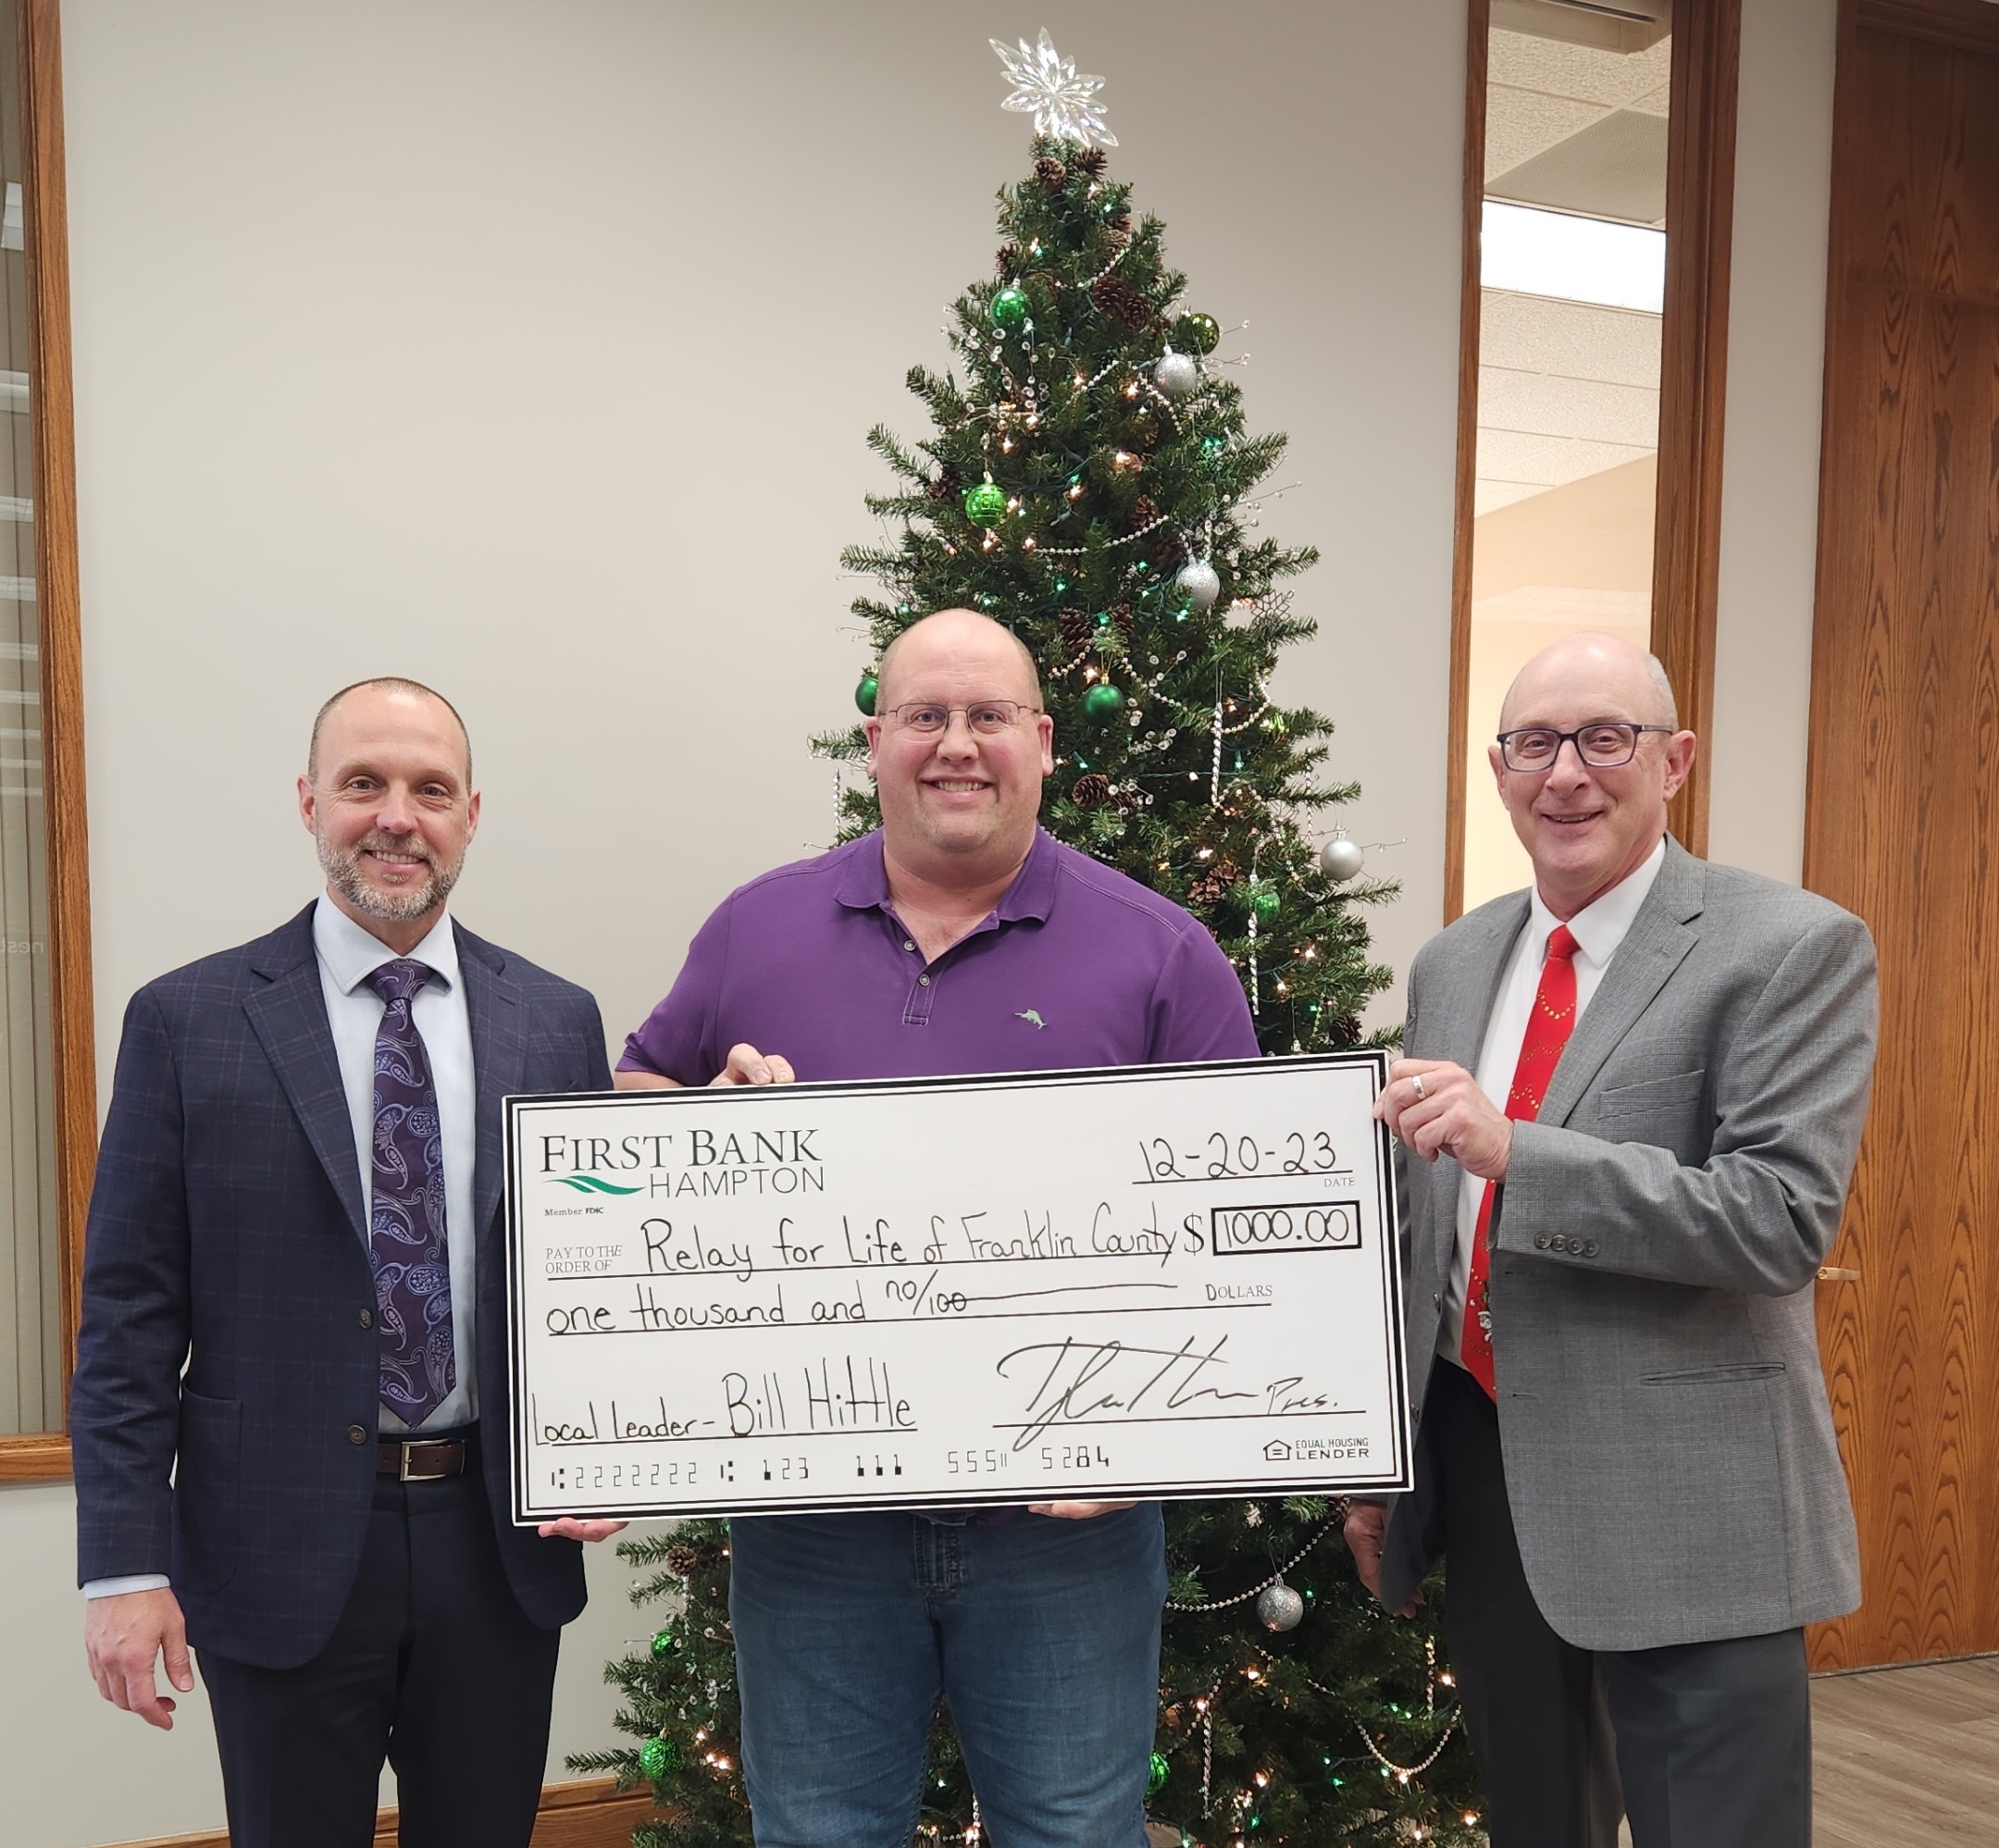 three people pose with a check from bank donation in front of Christmas tree.